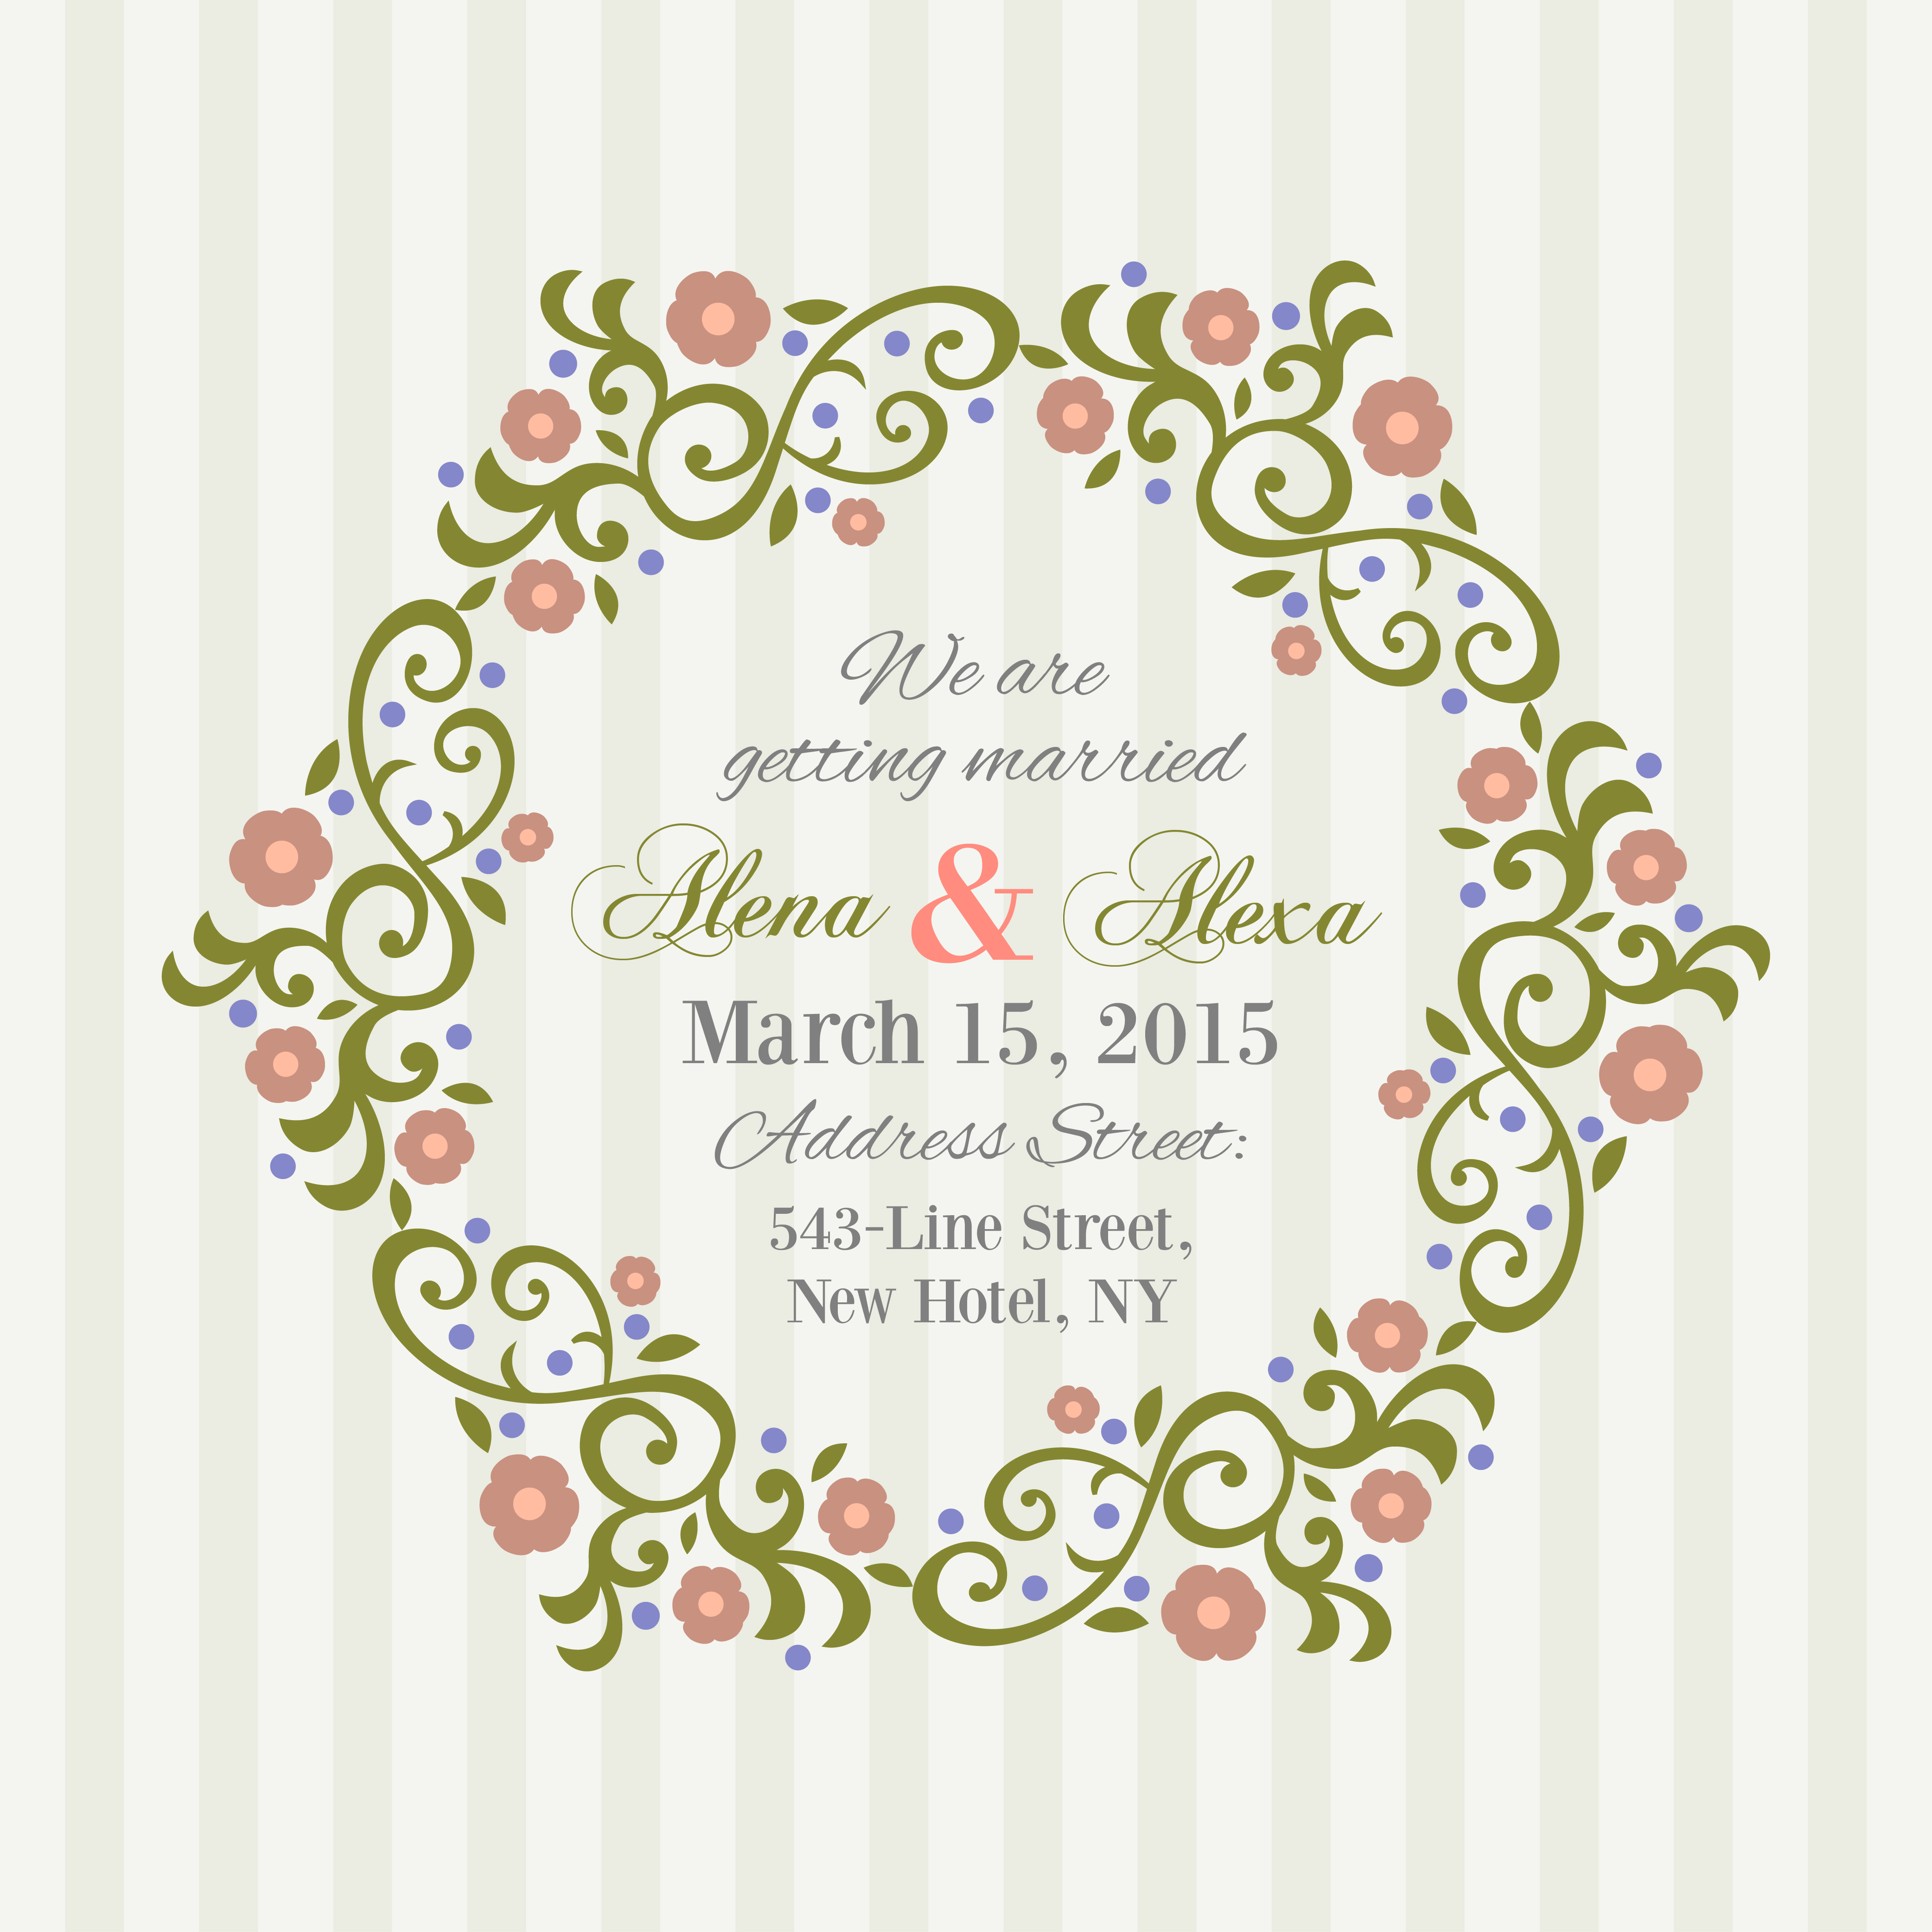 Invitation Card With Background Photoshop Vectors Brushlovers Com